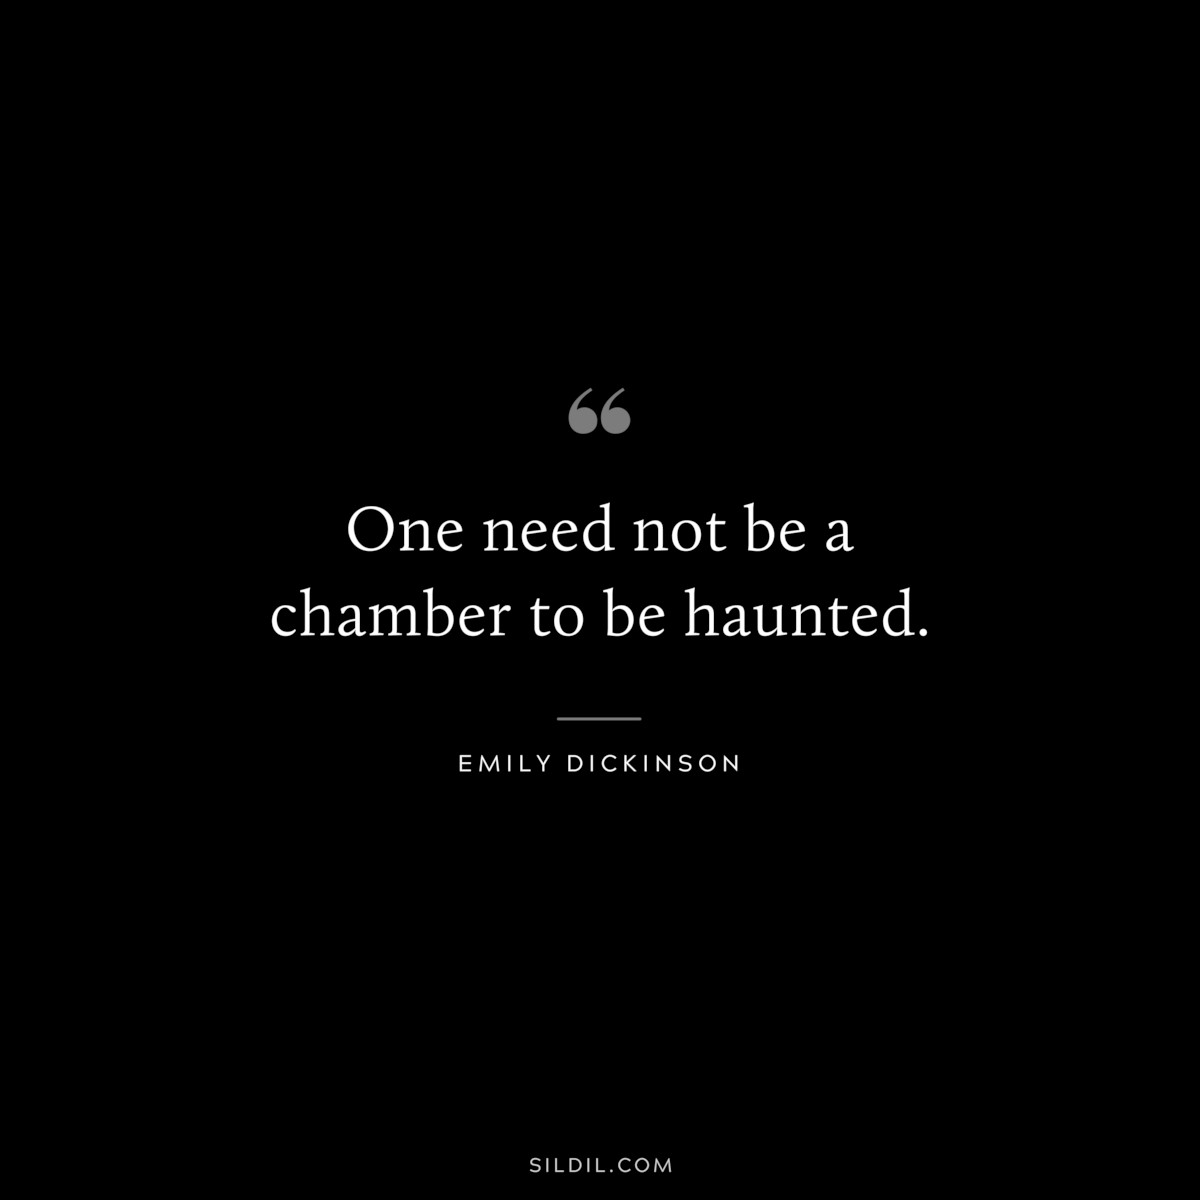 One need not be a chamber to be haunted.